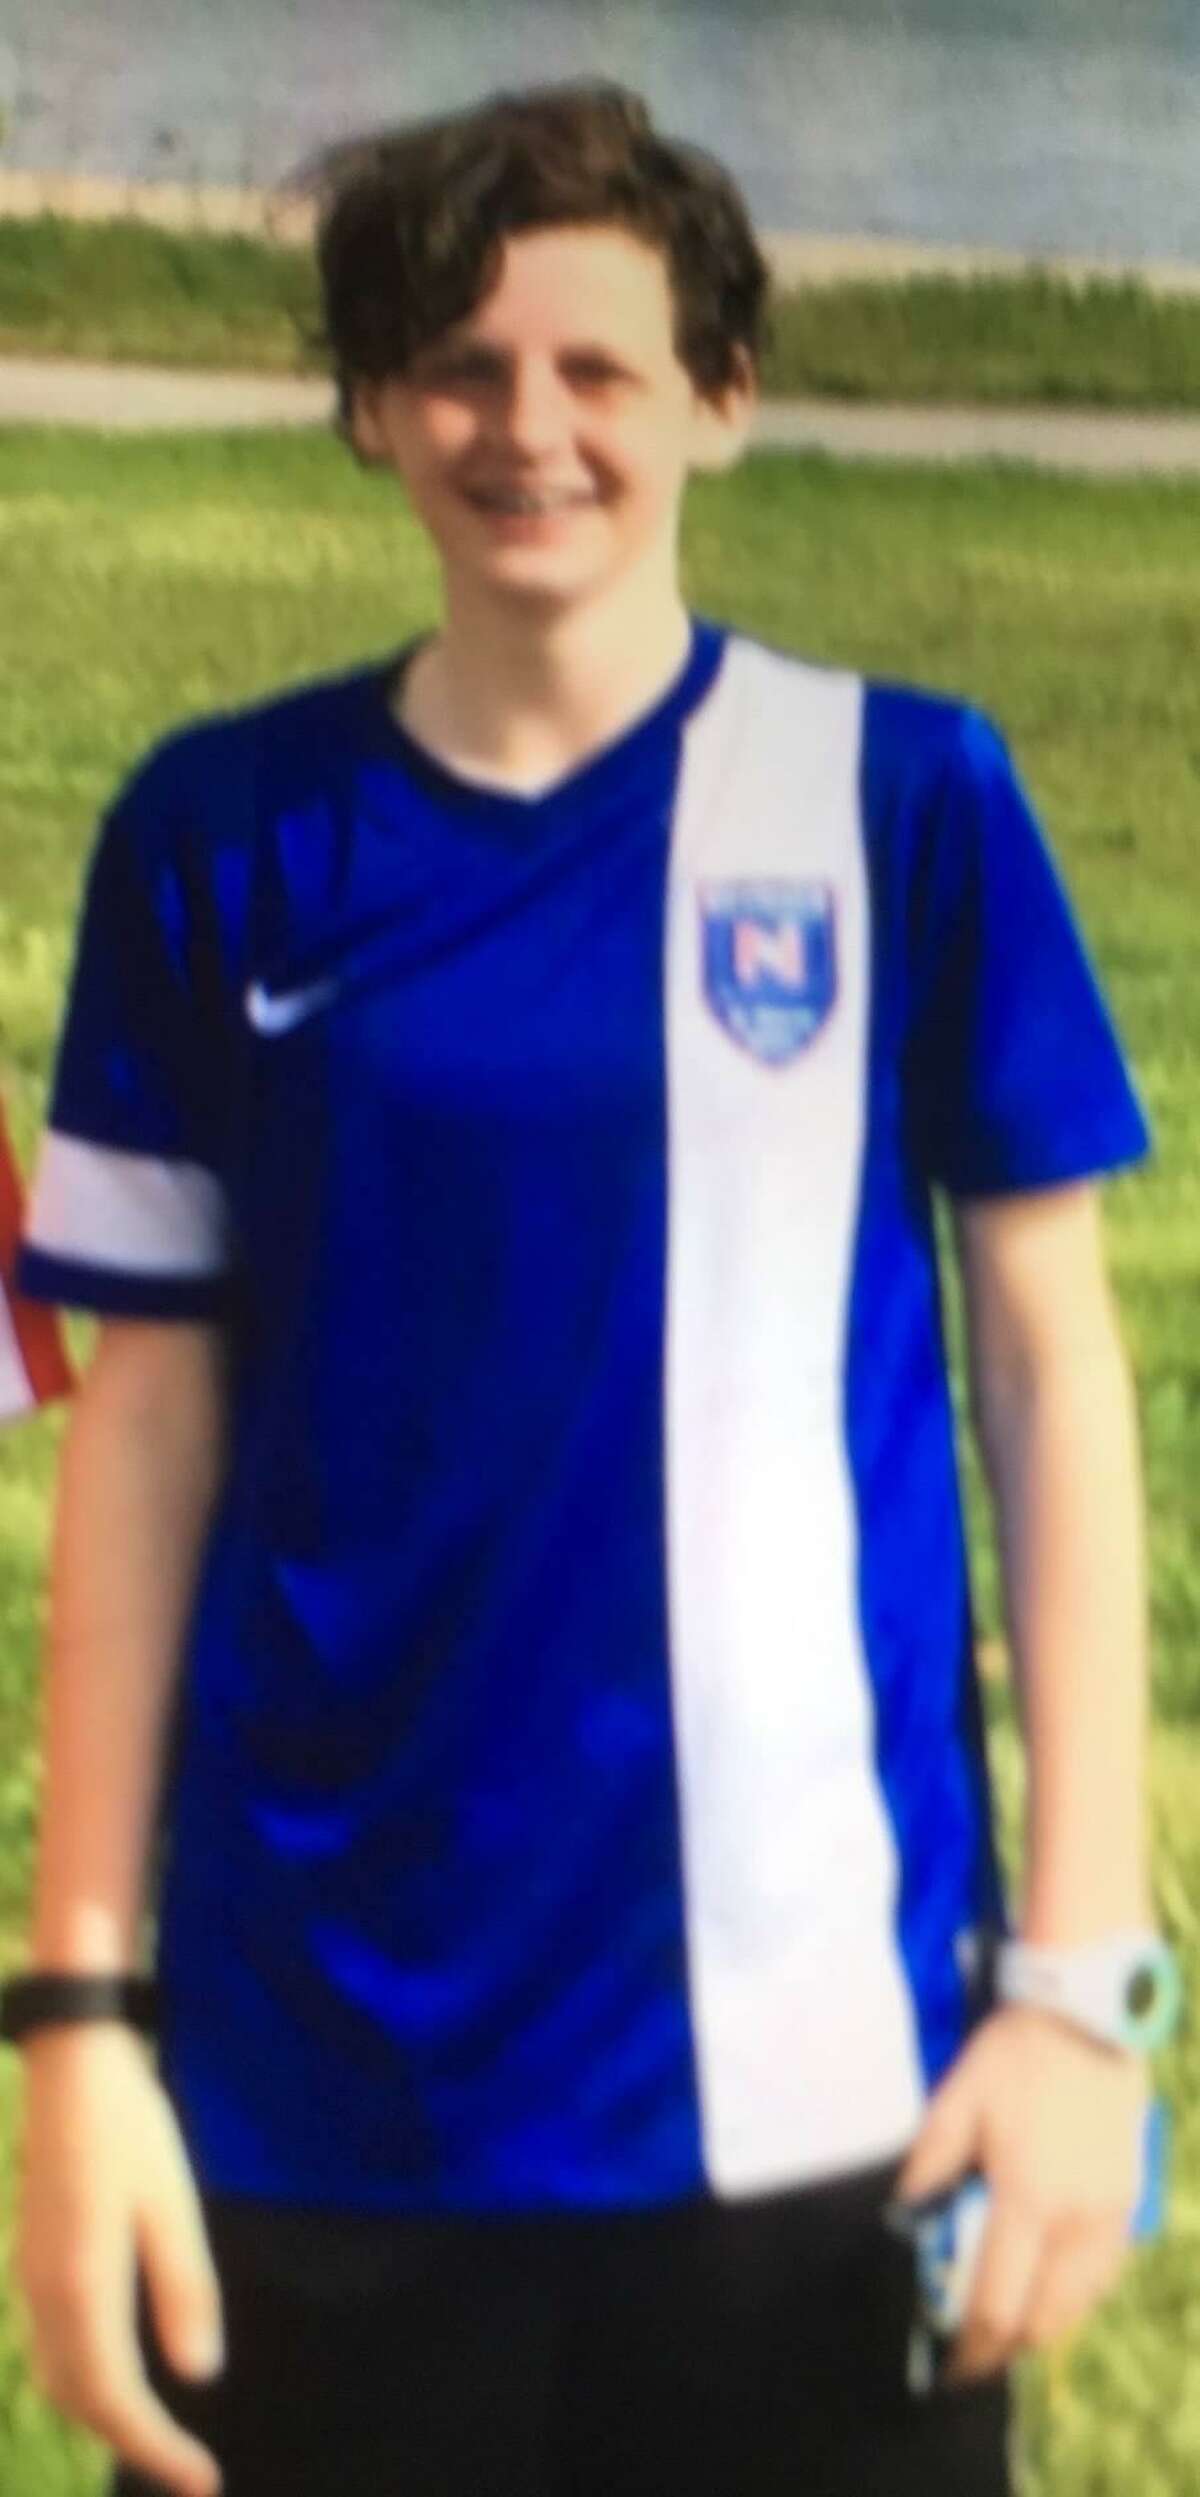 Police are searching for 12-year-old Charlotte Berliet after she walked away from the Montessori School in Wilton this morning.